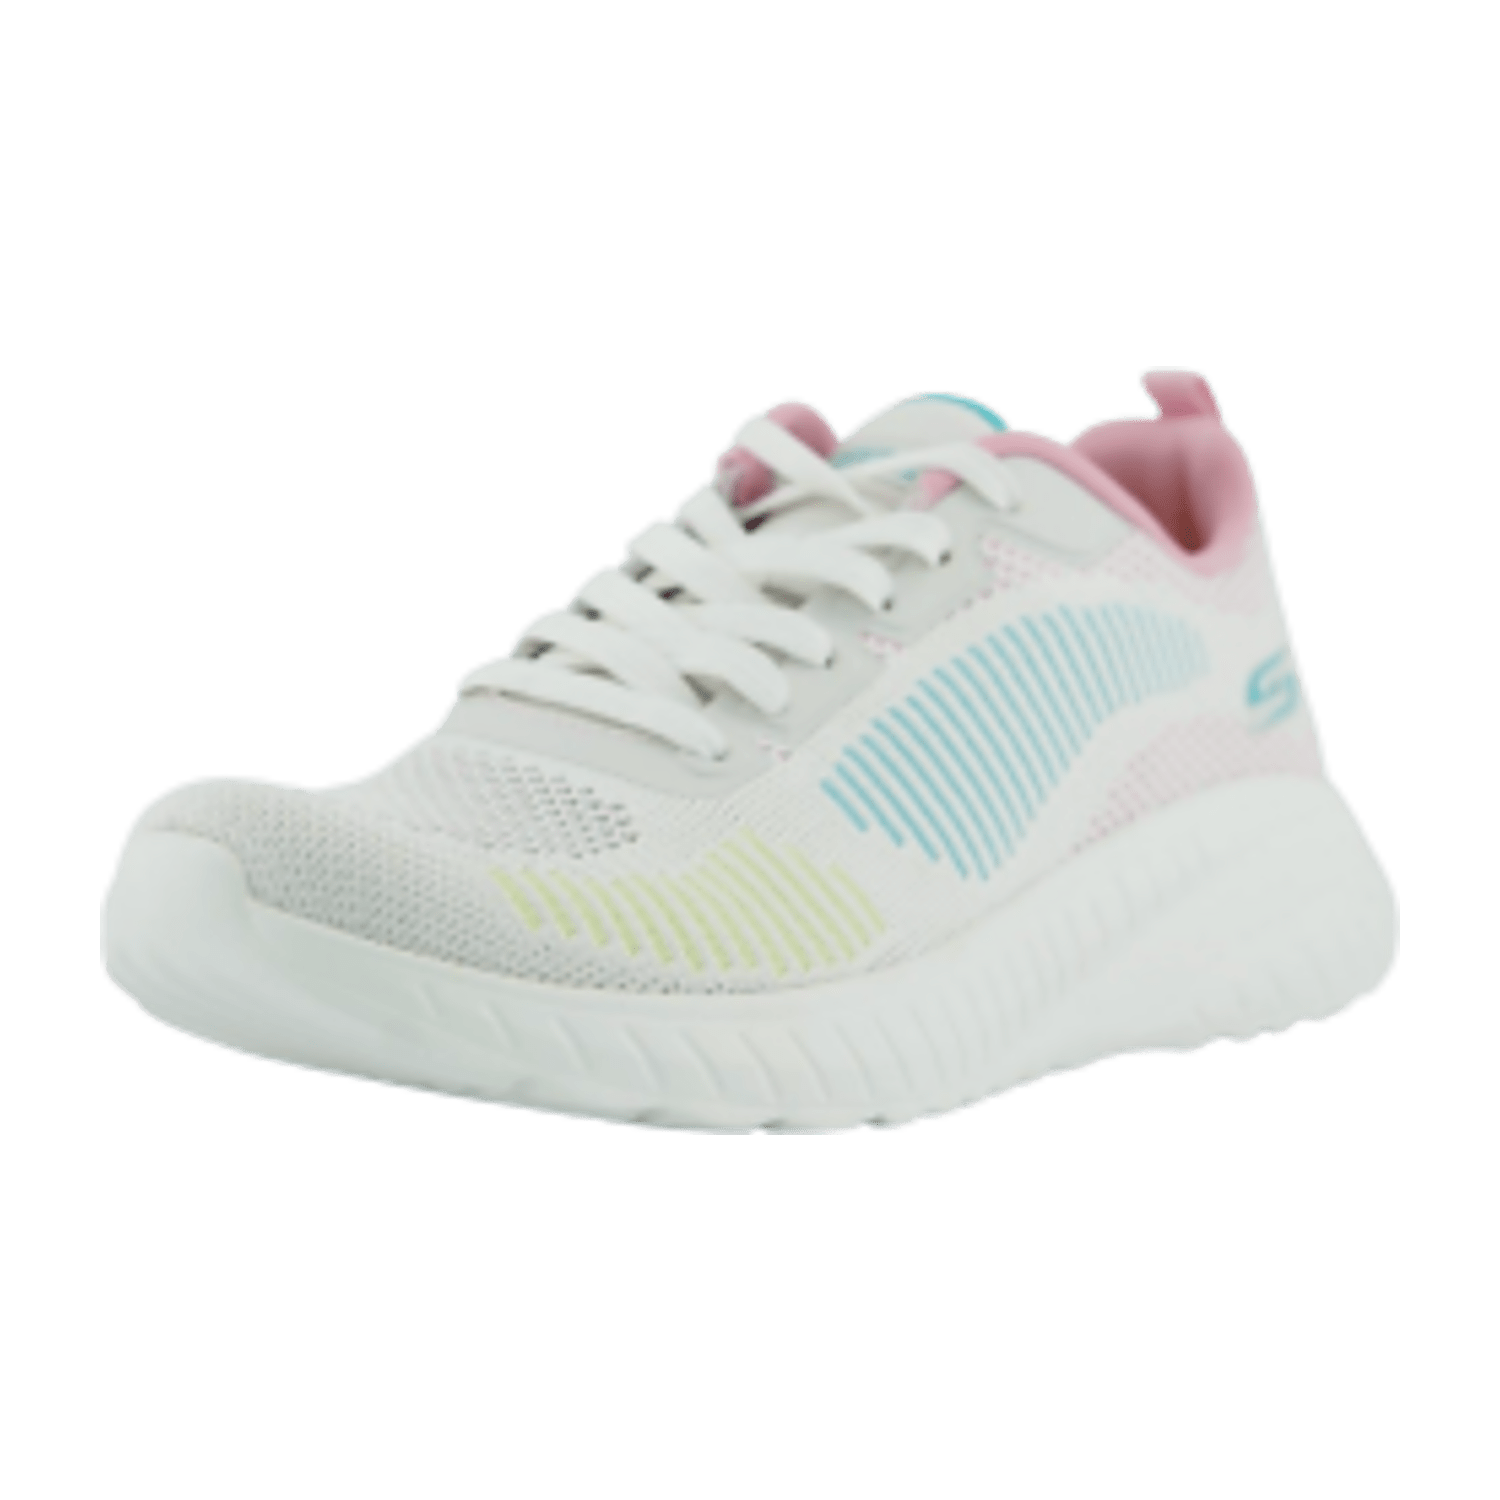 Skechers BOBS SQUAD CHAOS - COLOR CRUSH